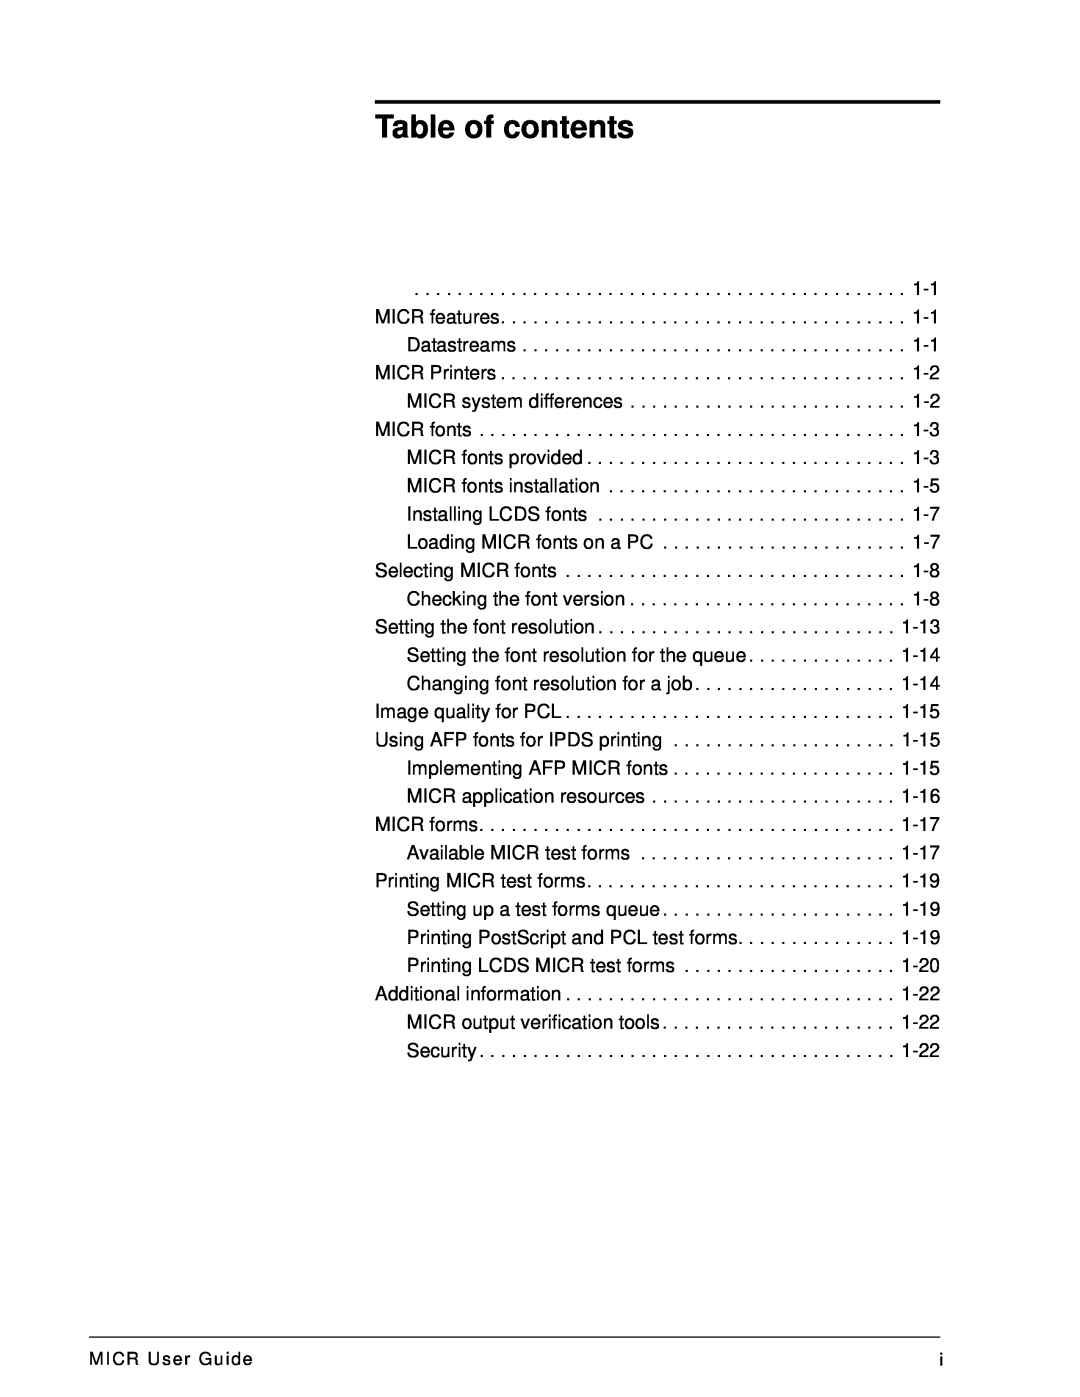 Xerox 701P47409 manual Table of contents, MICR User Guide 